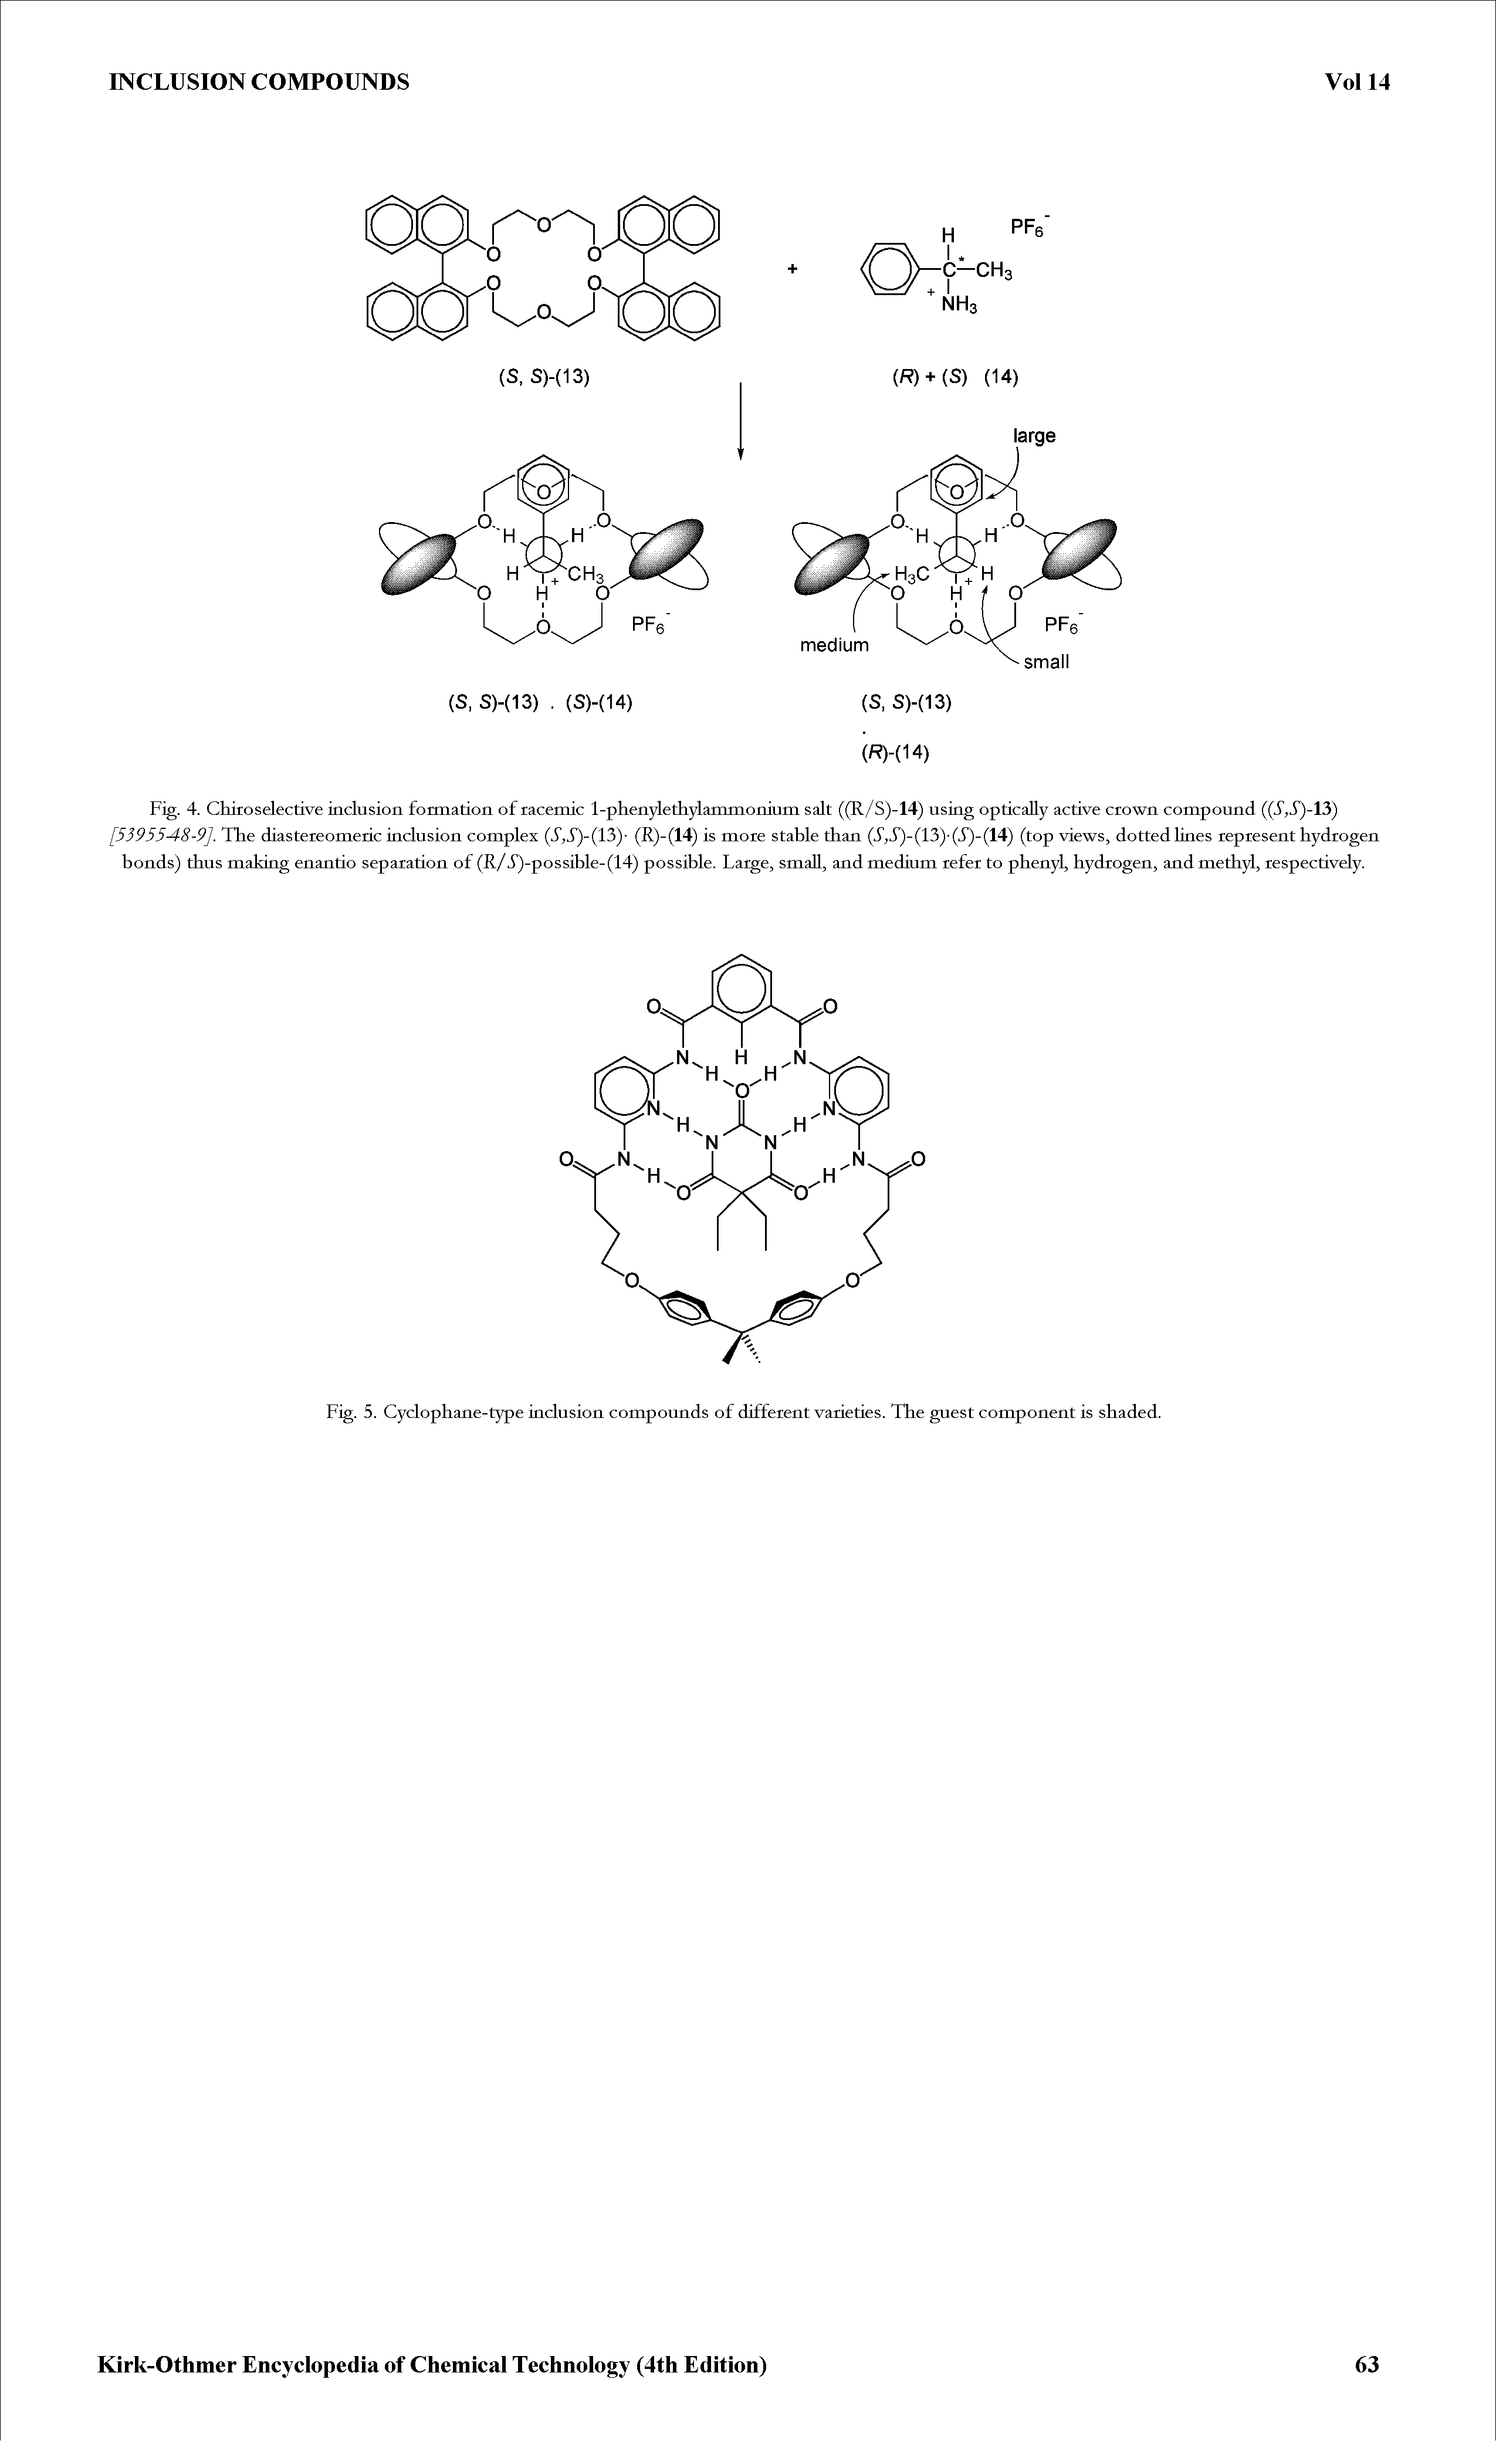 Fig. 5. Cyclophane-type inclusion compounds of different varieties. The guest component is shaded.